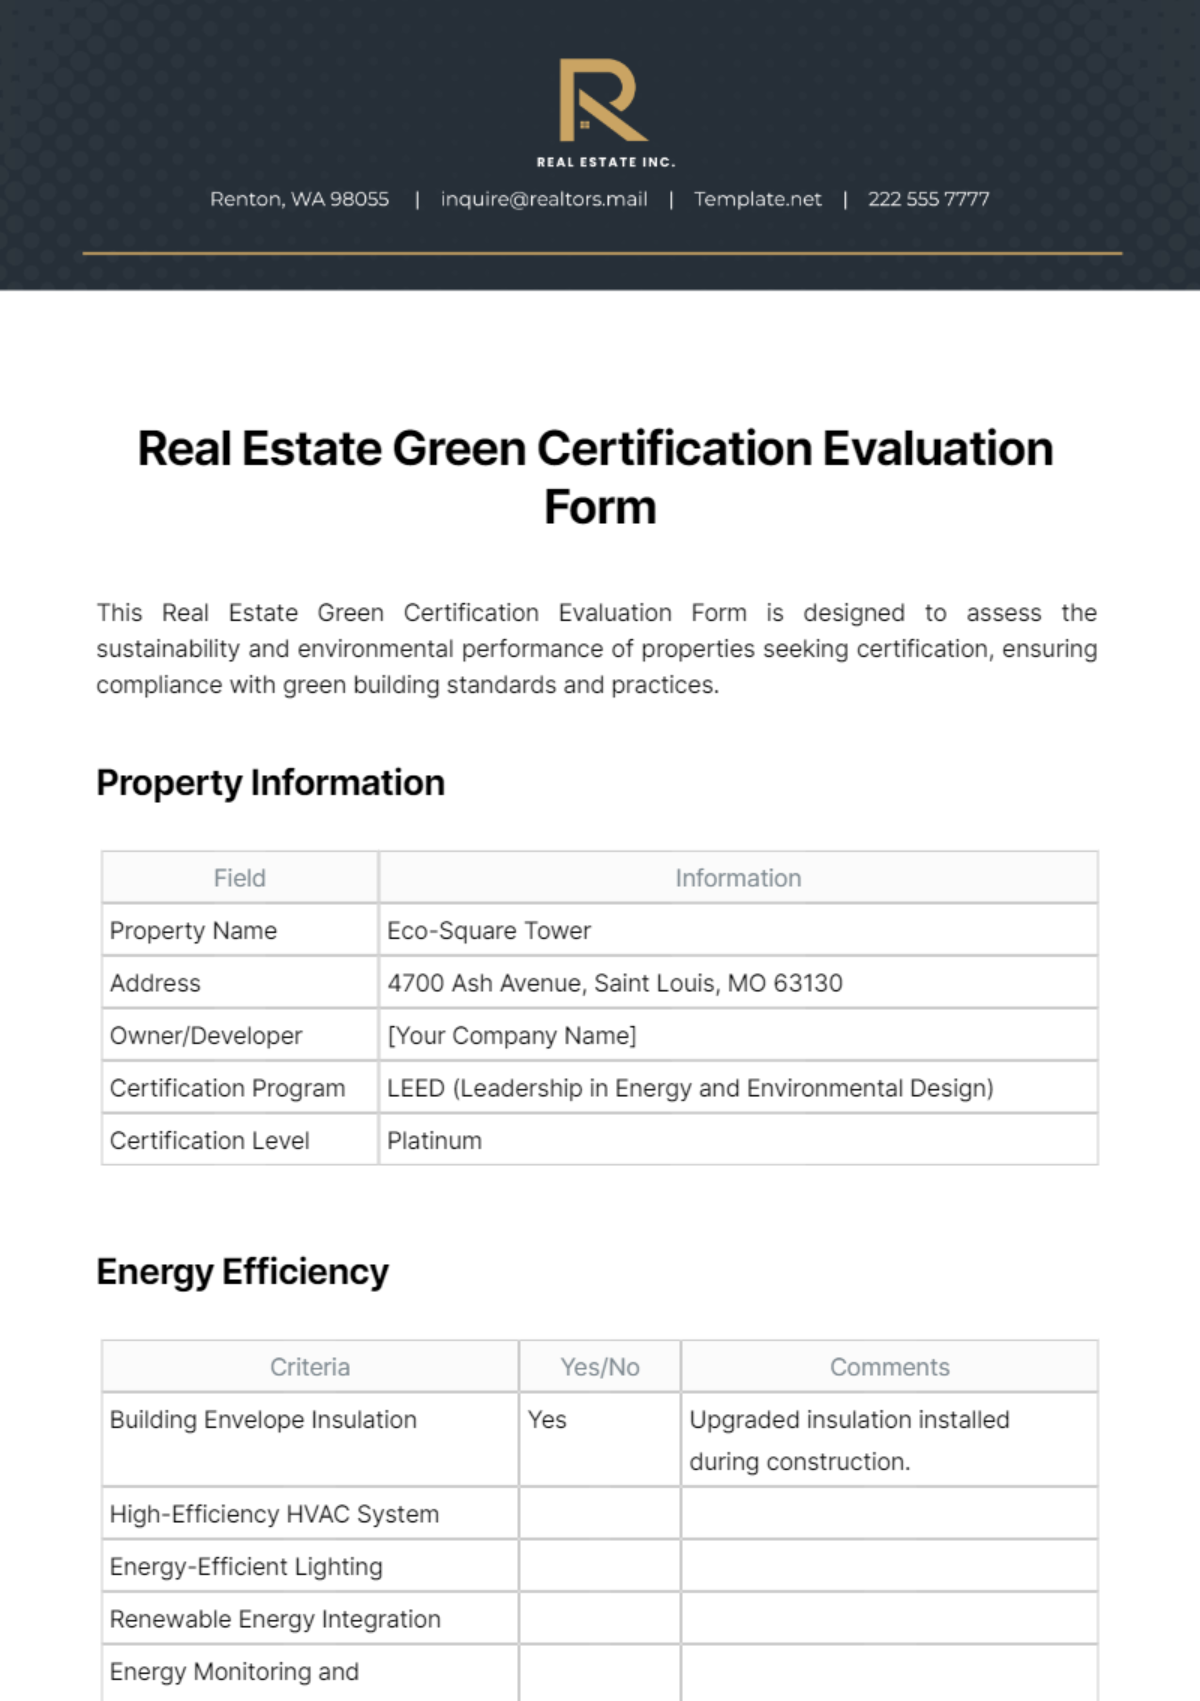 Real Estate Green Certification Evaluation Form Template